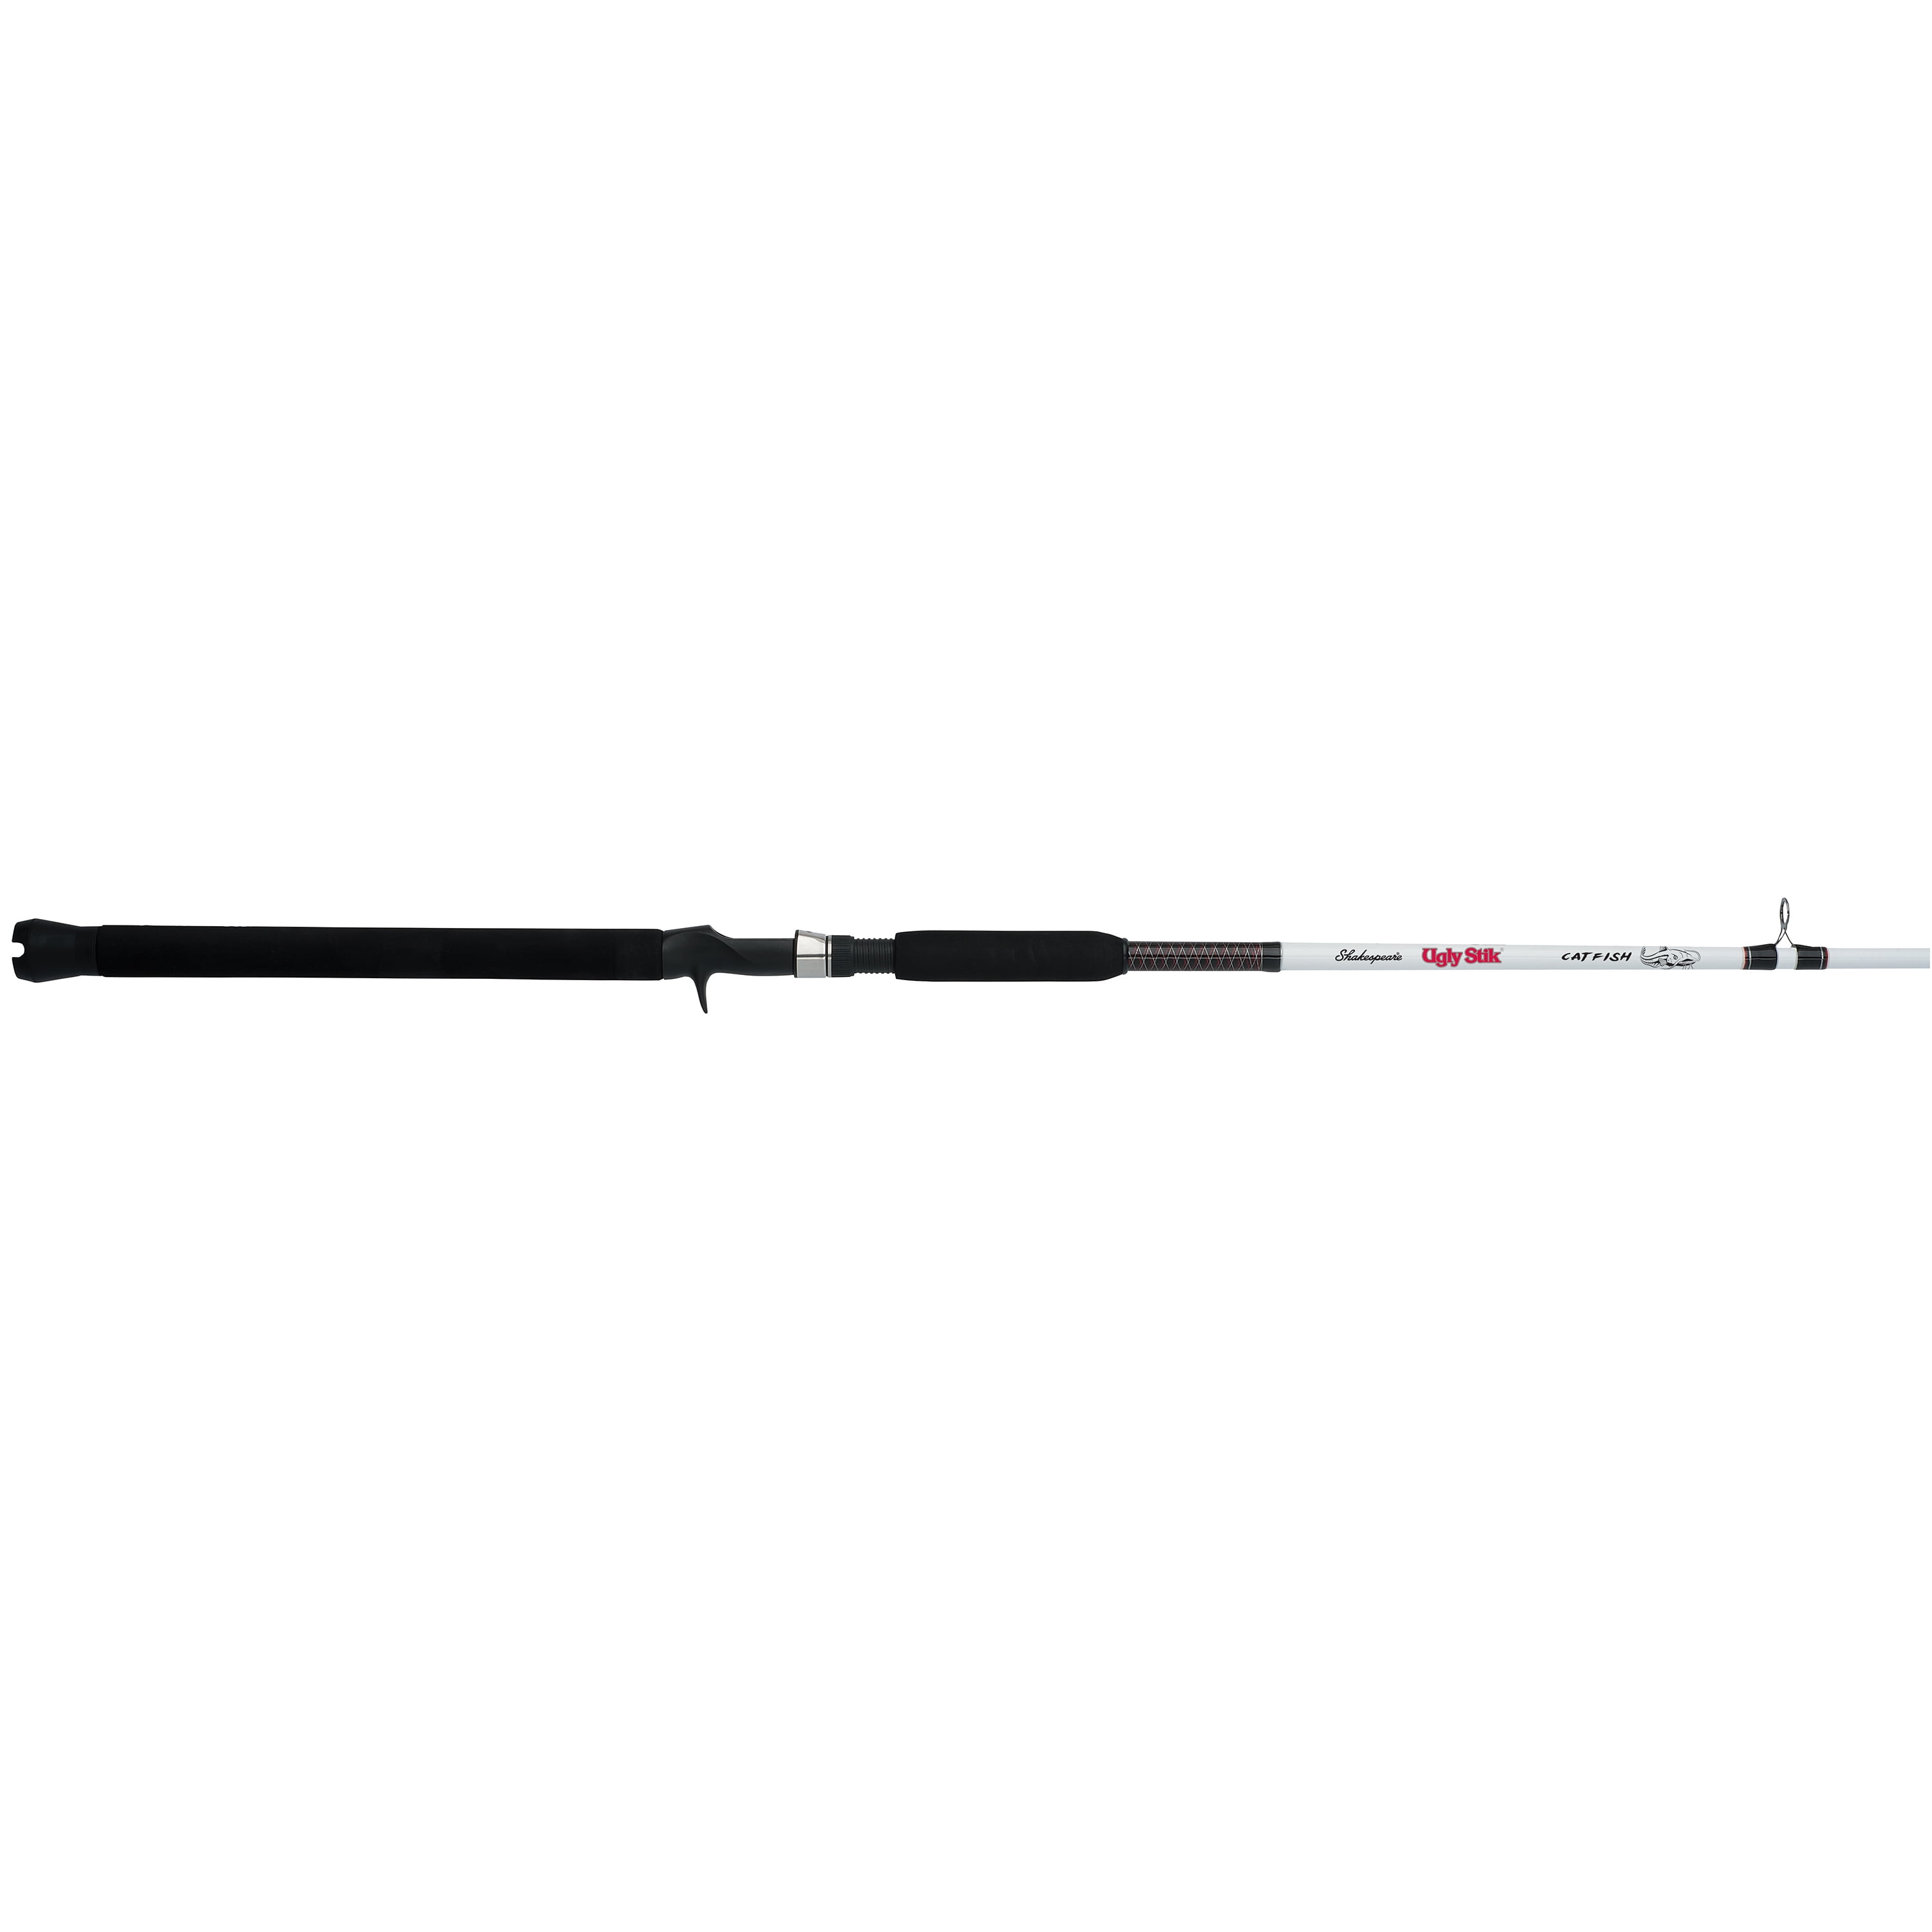 8ft Ugly Stik Gold 5-8kg Spinning Fishing Rod - 2 Piece Spin Rod, Hooked  Online